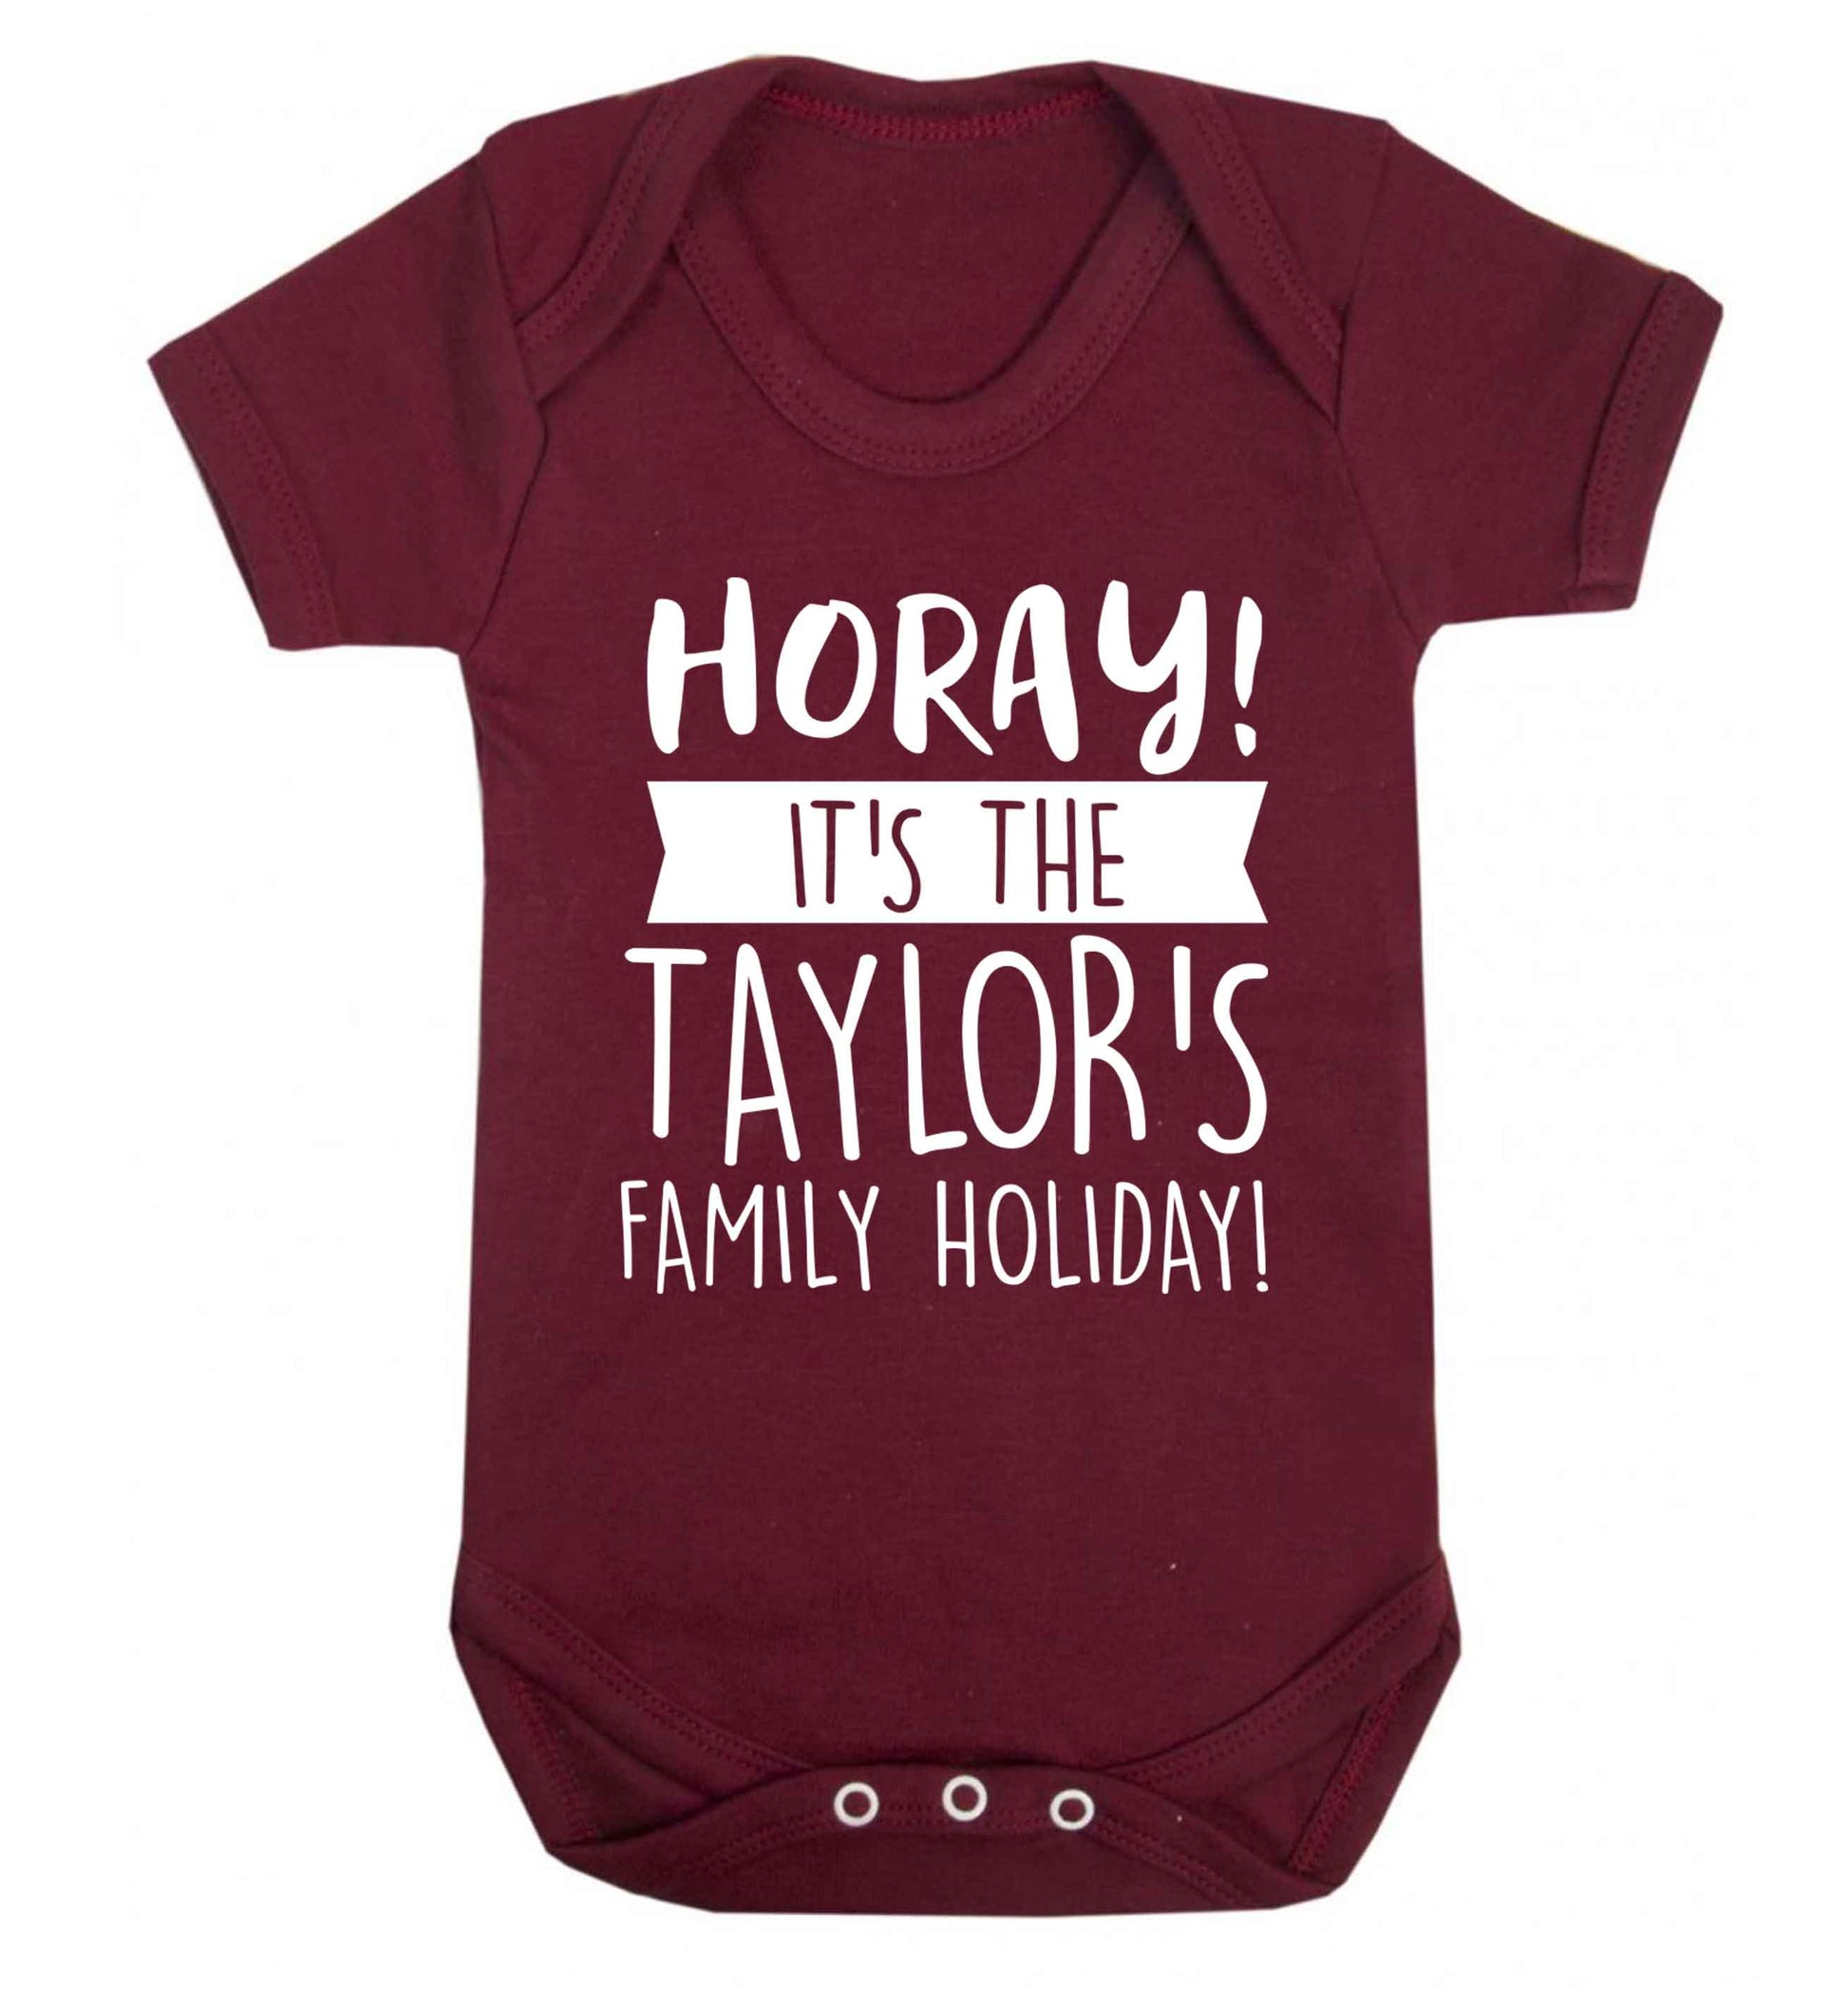 Horay it's the Taylor's family holiday! personalised item Baby Vest maroon 18-24 months